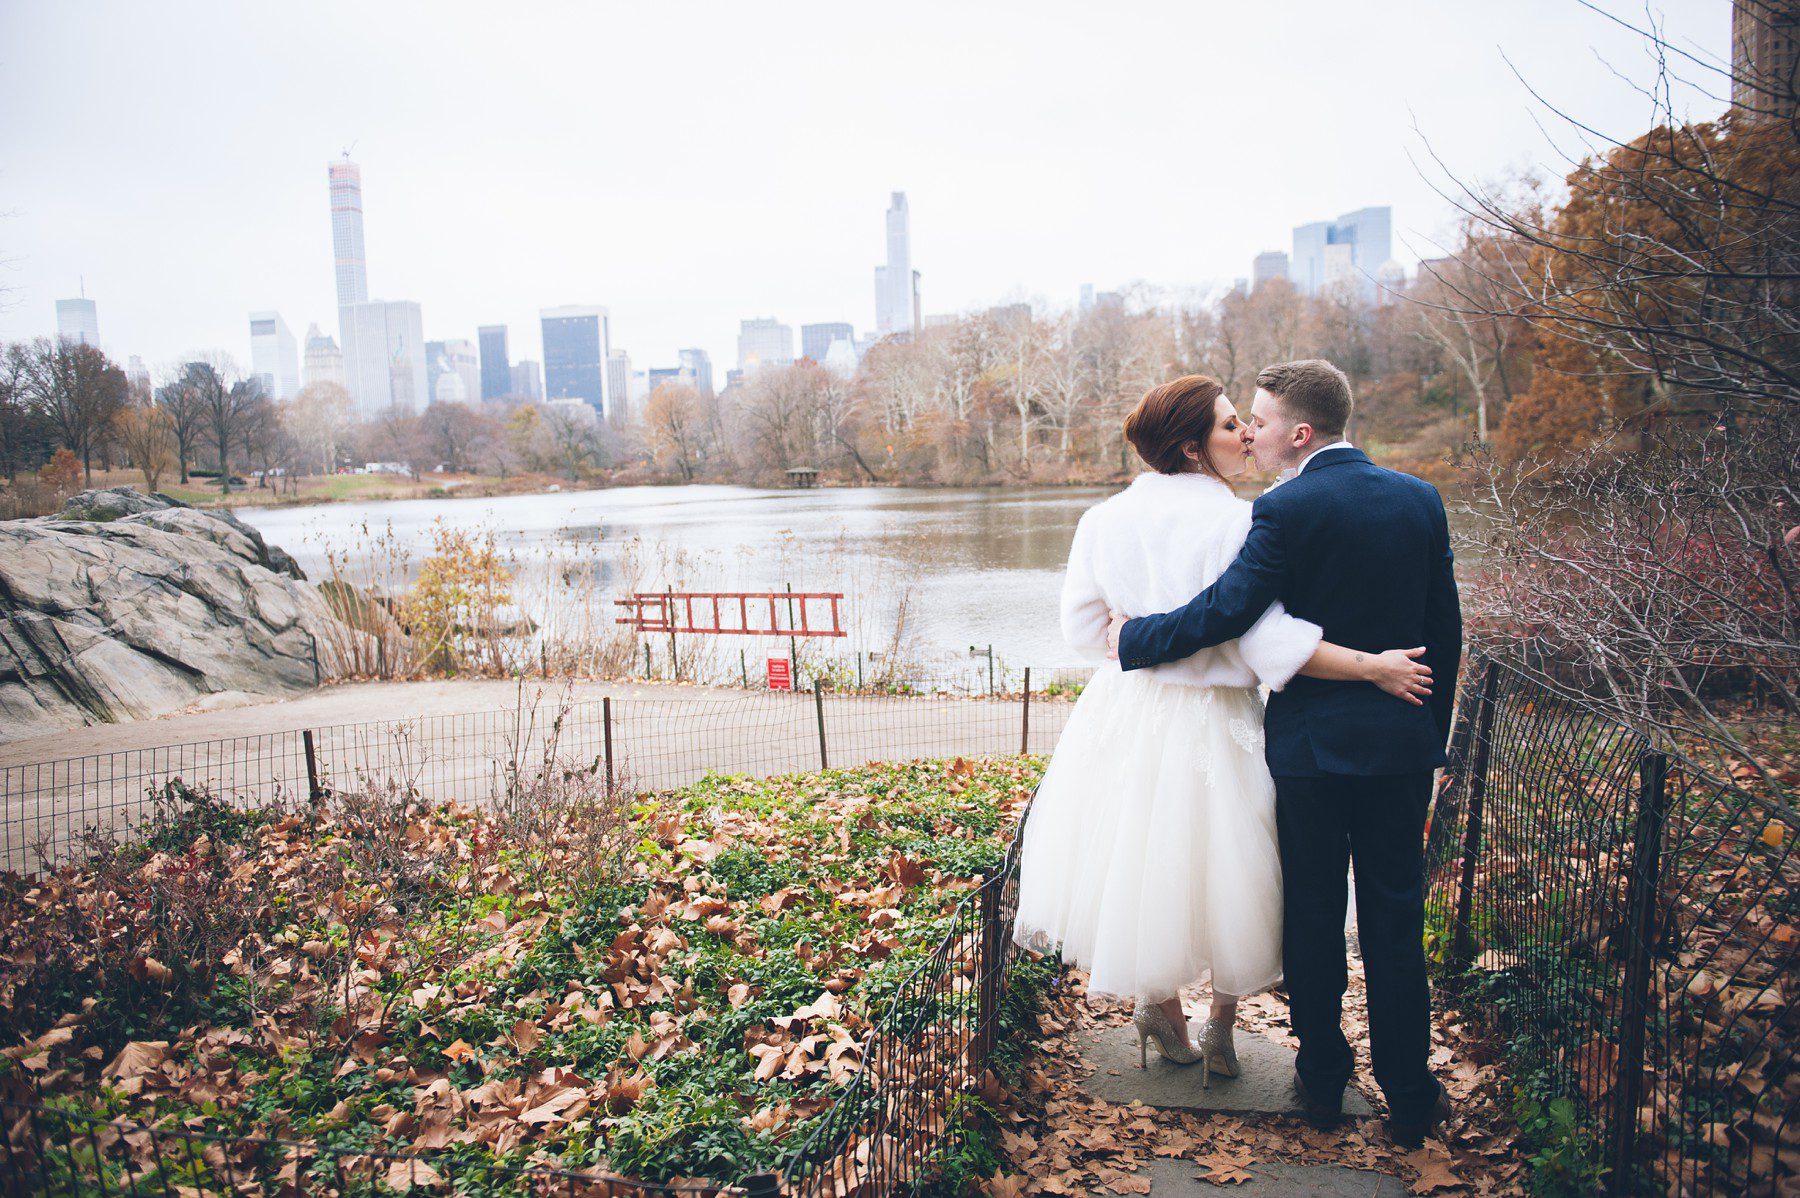 get married at ladies pavilion in central park